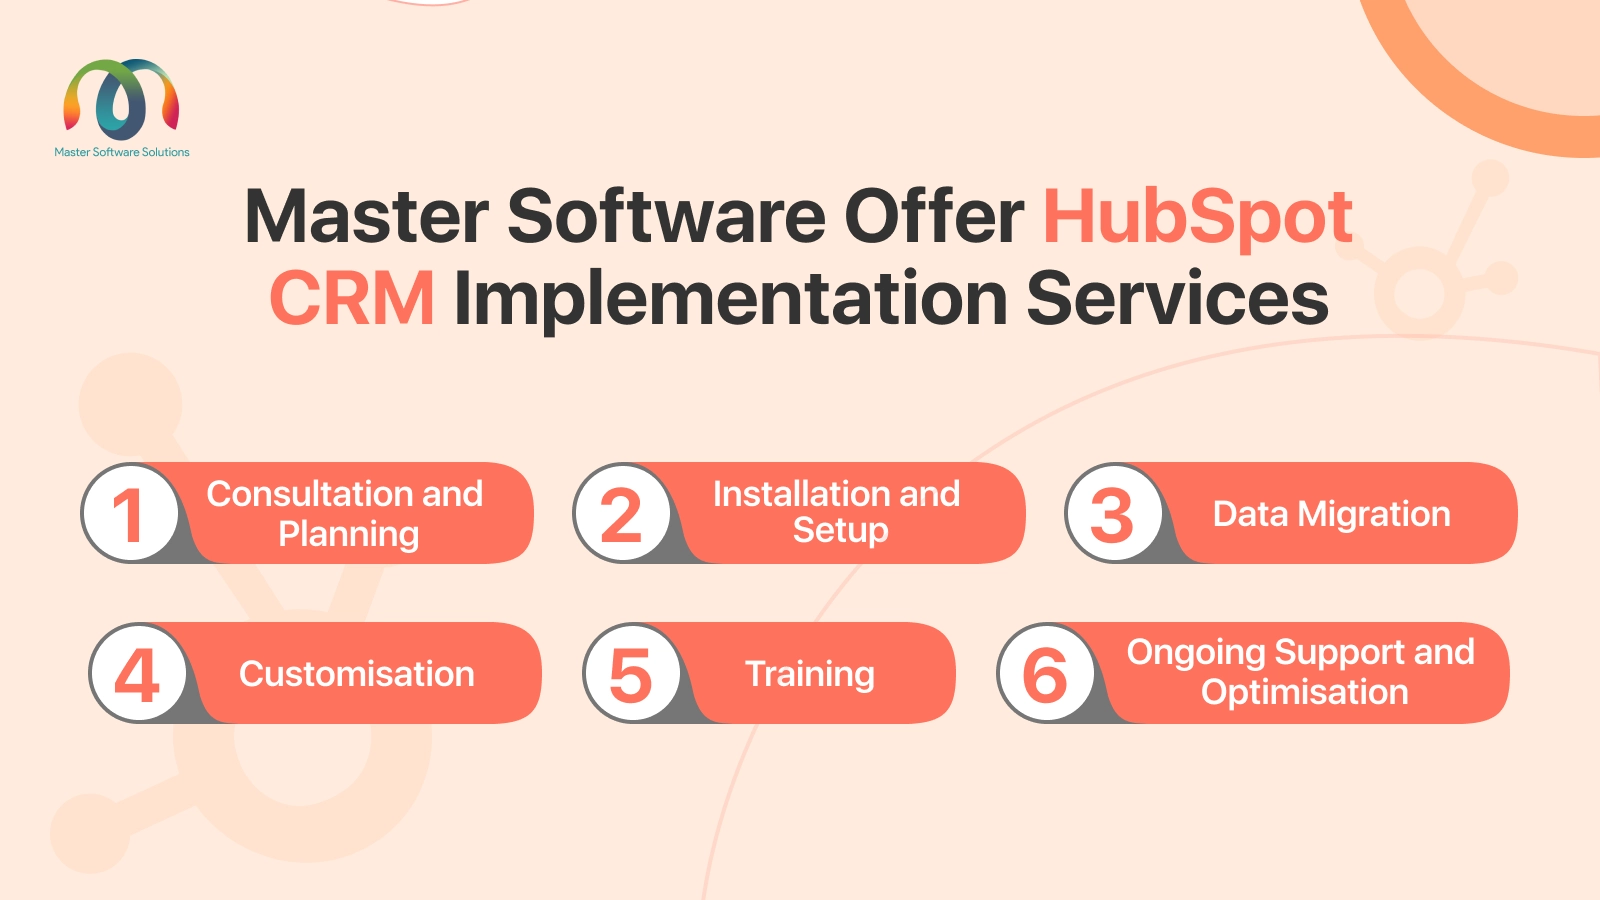 ravi garg, mss, master software solutions, hubspot crm implementation services, consultation and planning, installation and setup, data migration, customisation, training, testing and launch, ongoing support, optimisation